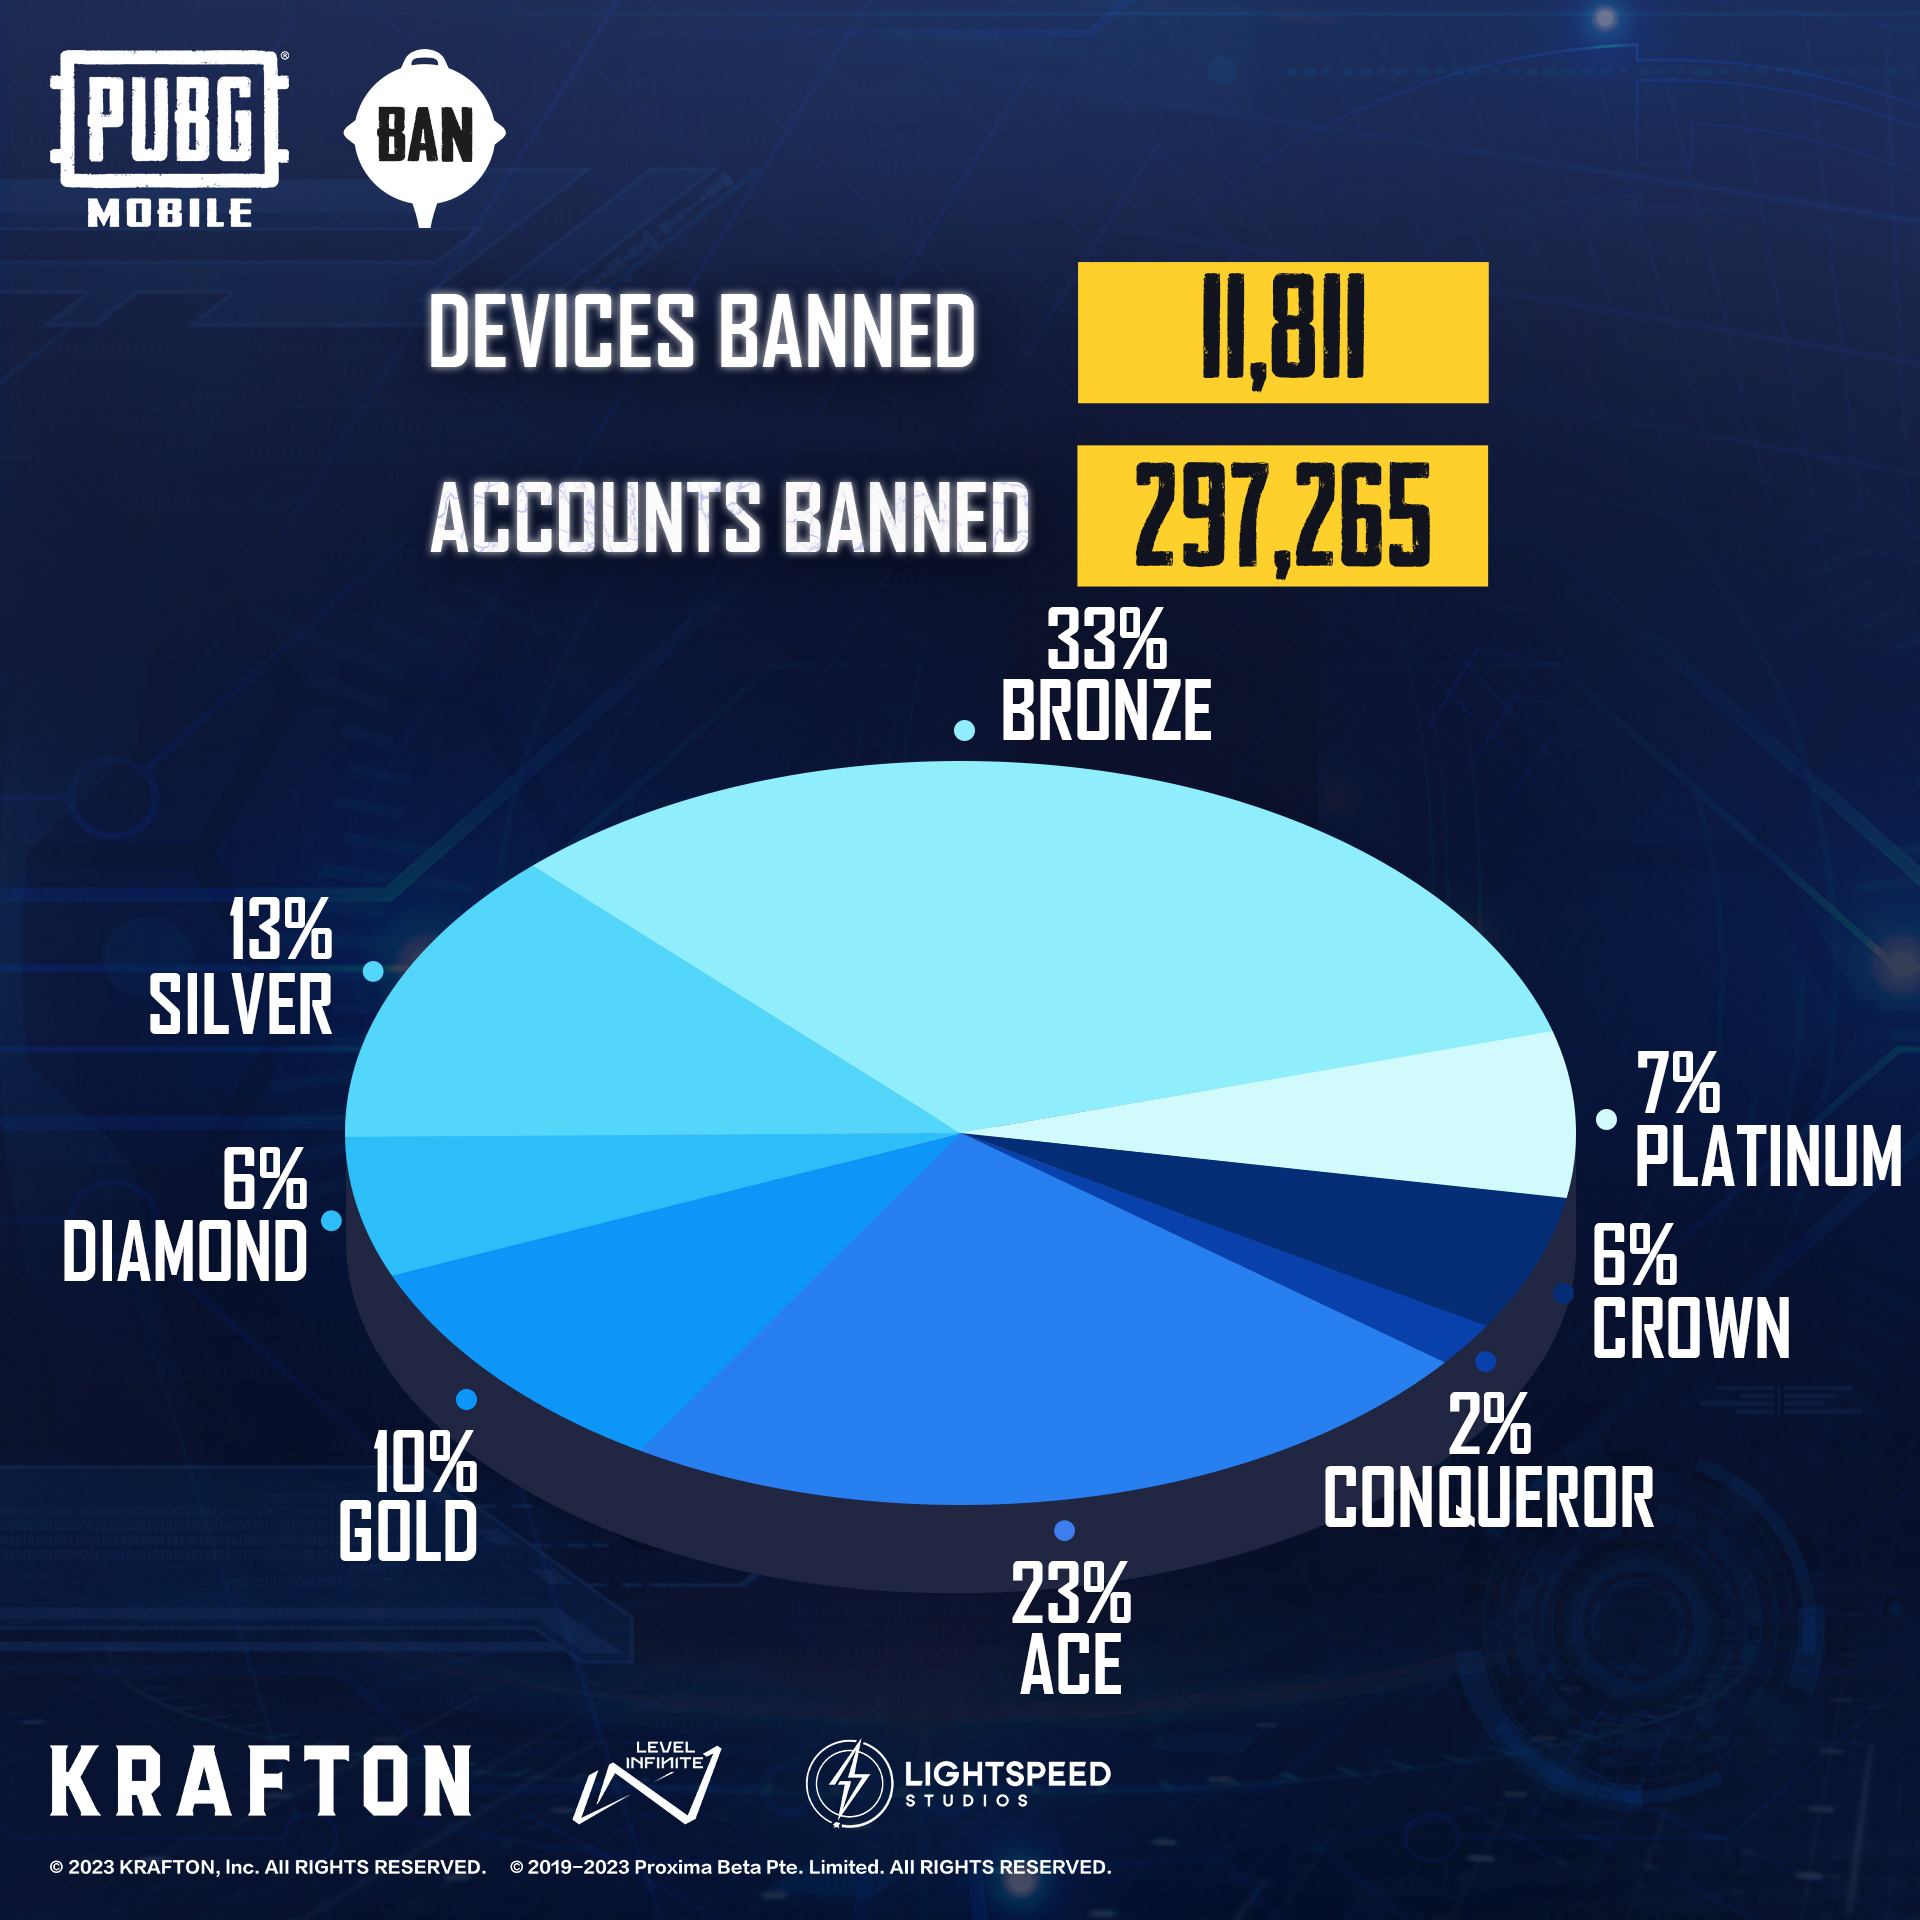 PUBG Mobile Bans 297,265 Accounts for Cheating in Week 21